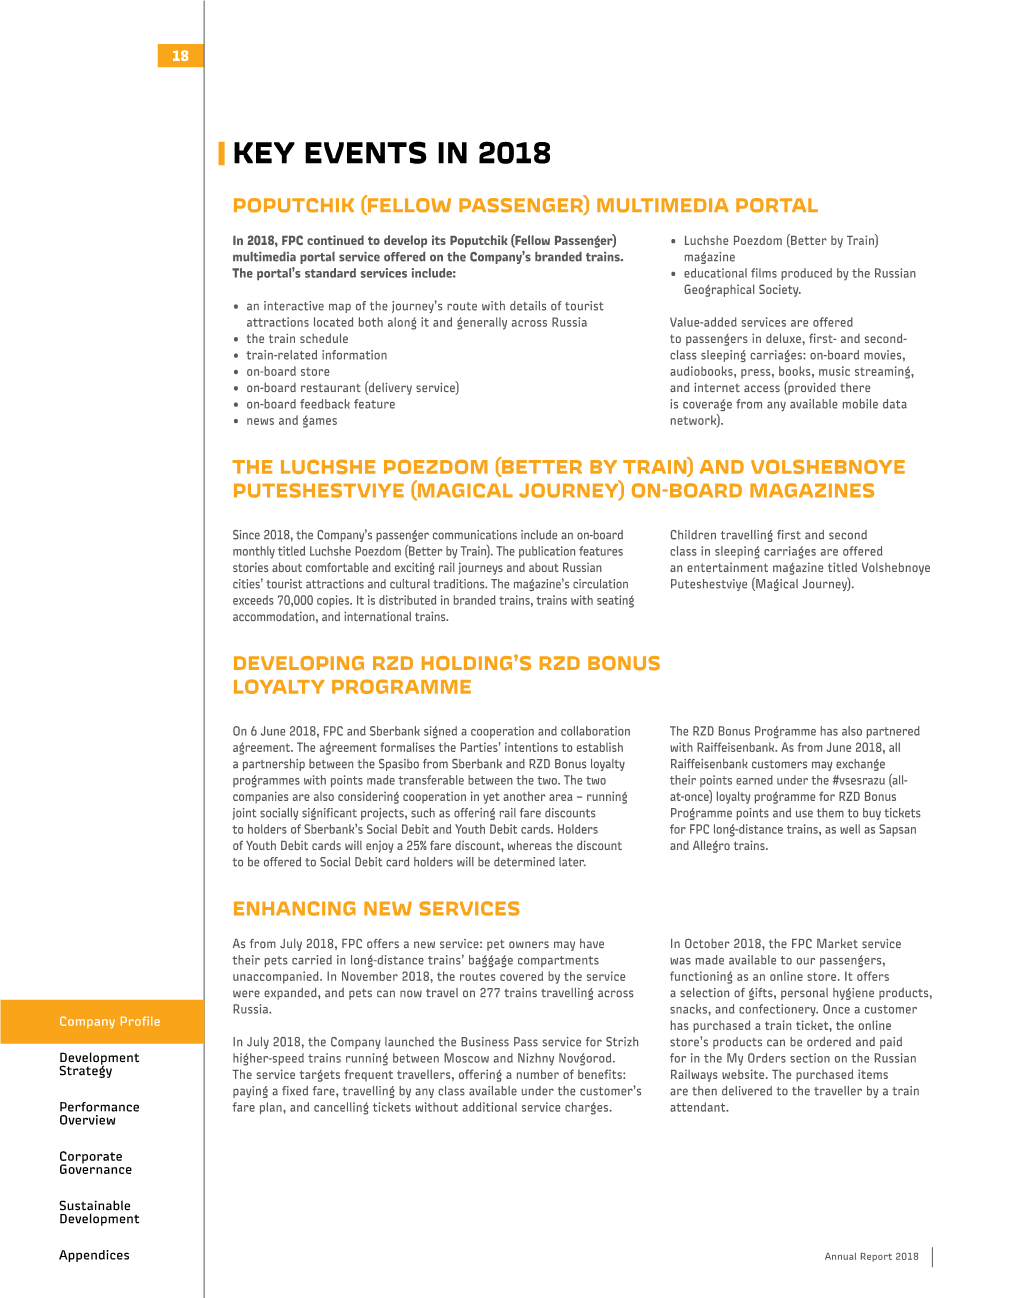 Key Events in 2018